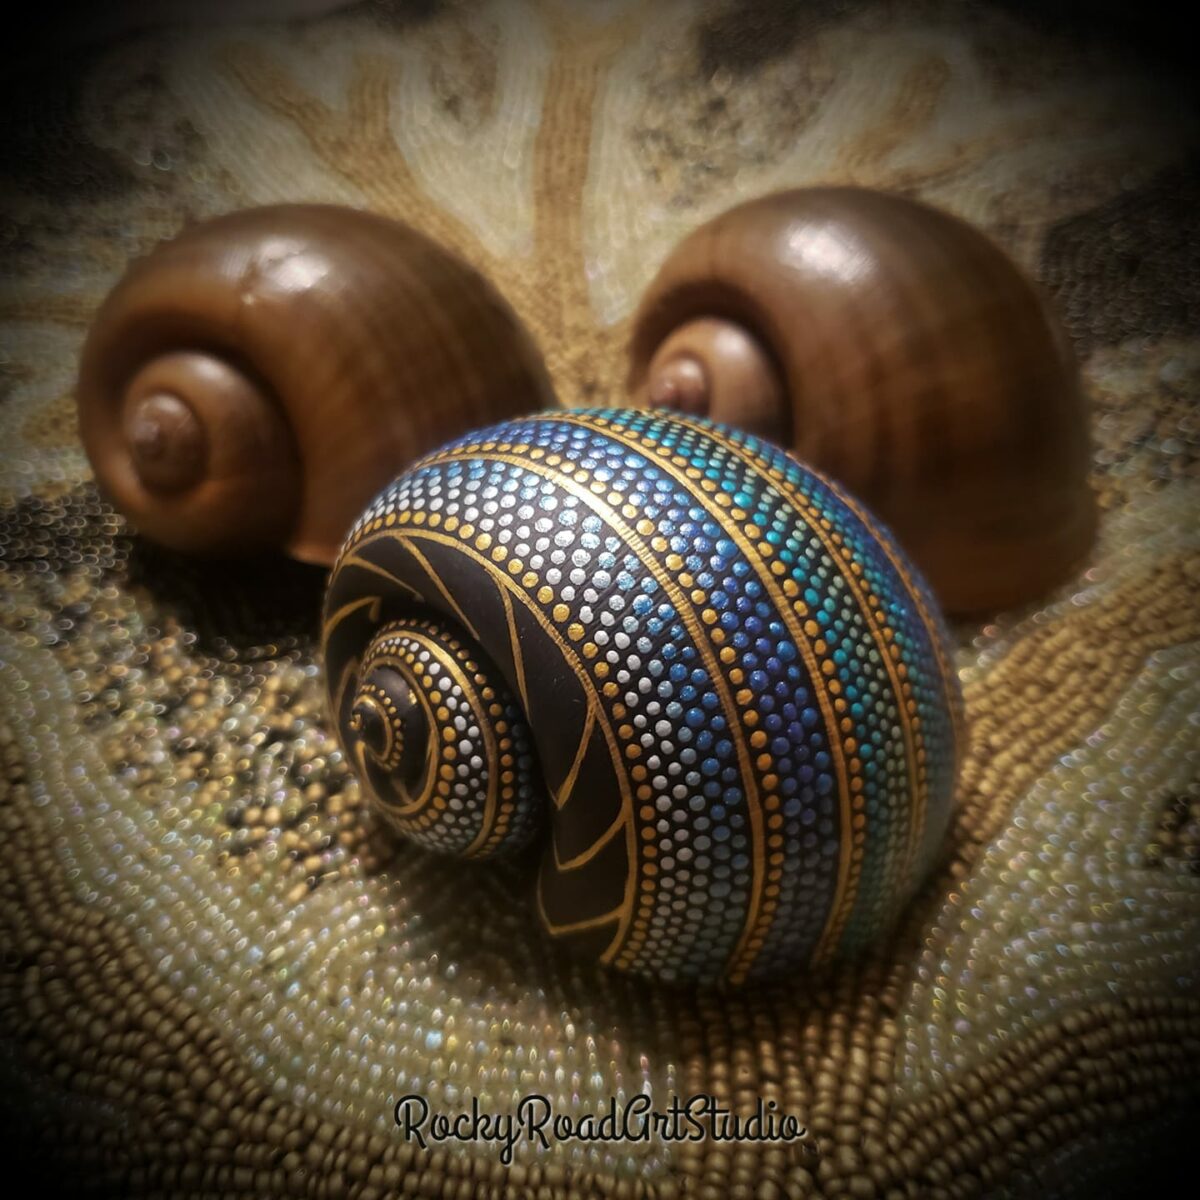 Snail Shells Decorated With Gorgeous Patterns By Lisa Orlans 15